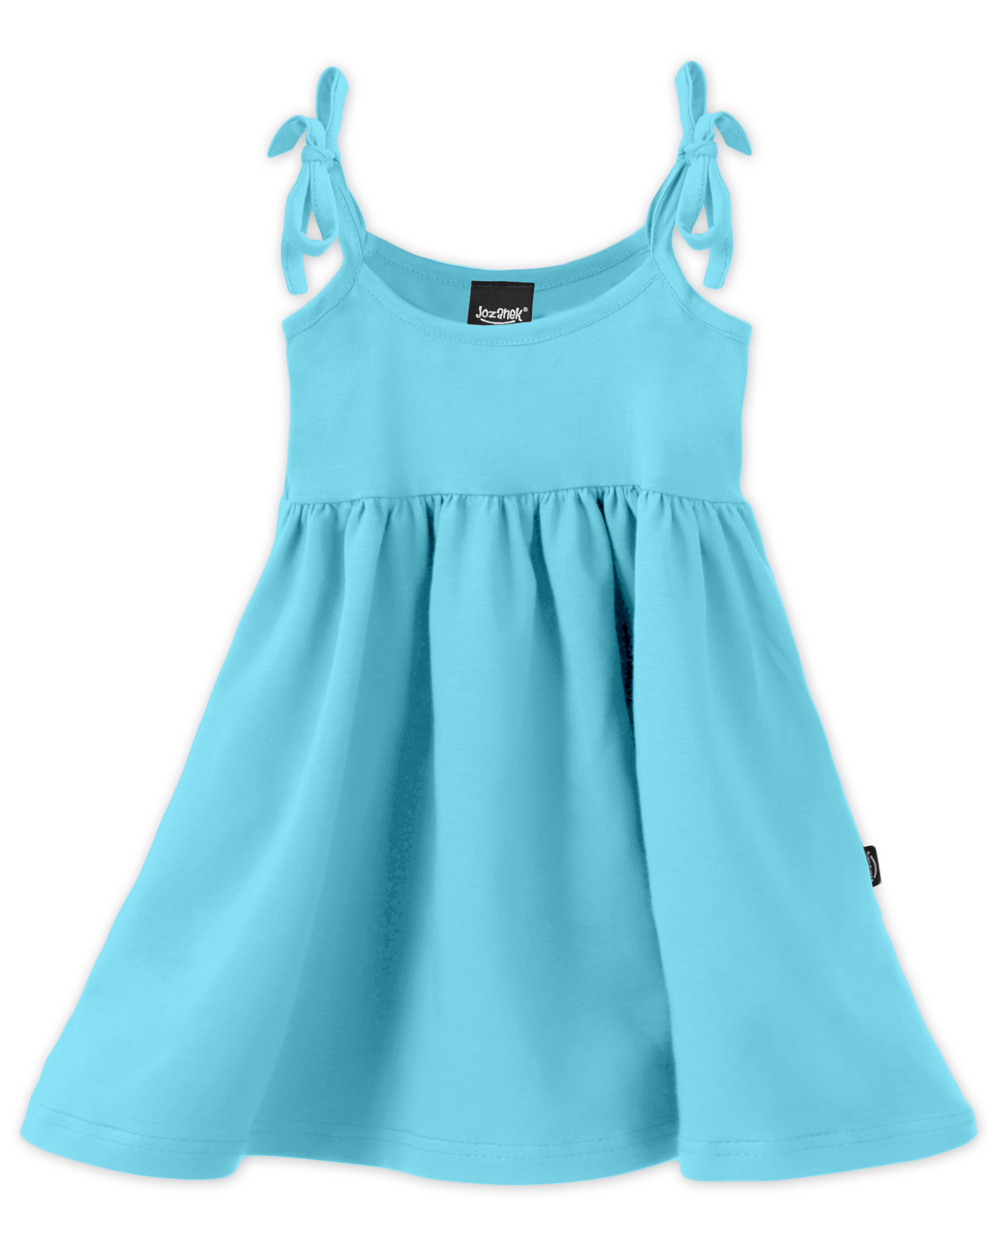 Children’s dresses, tying on shoulders, turquoise